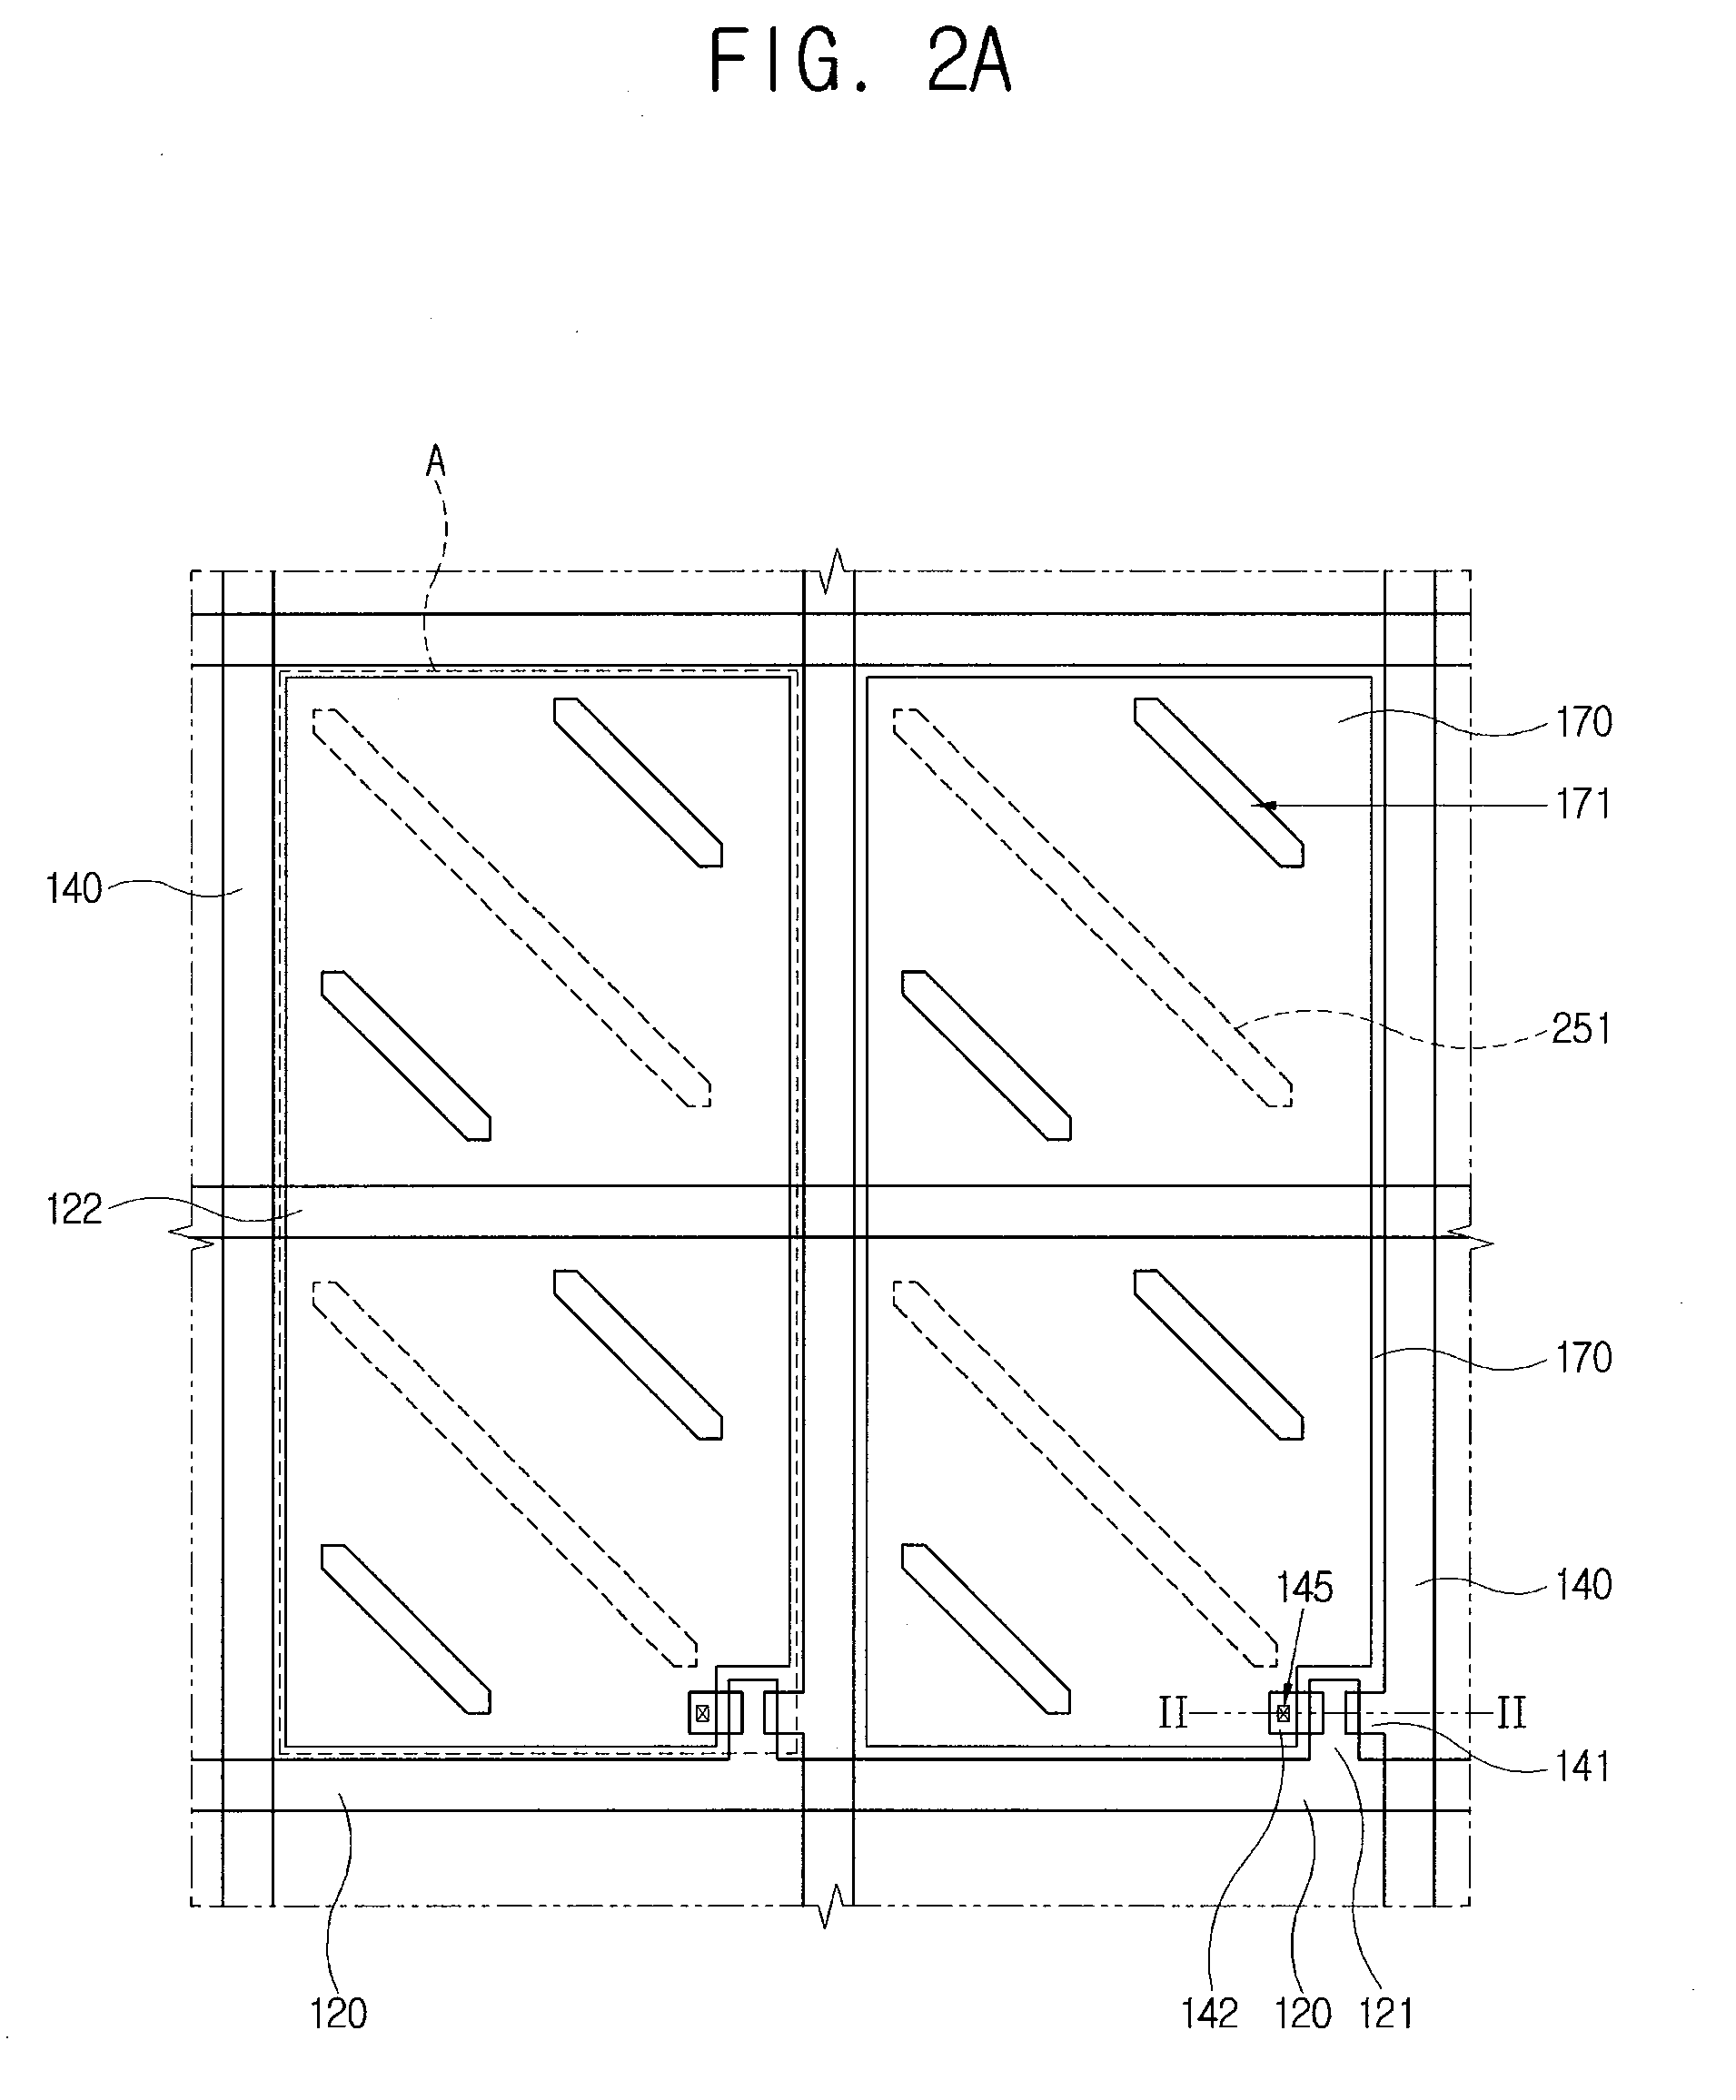 Display device and control methods therefor